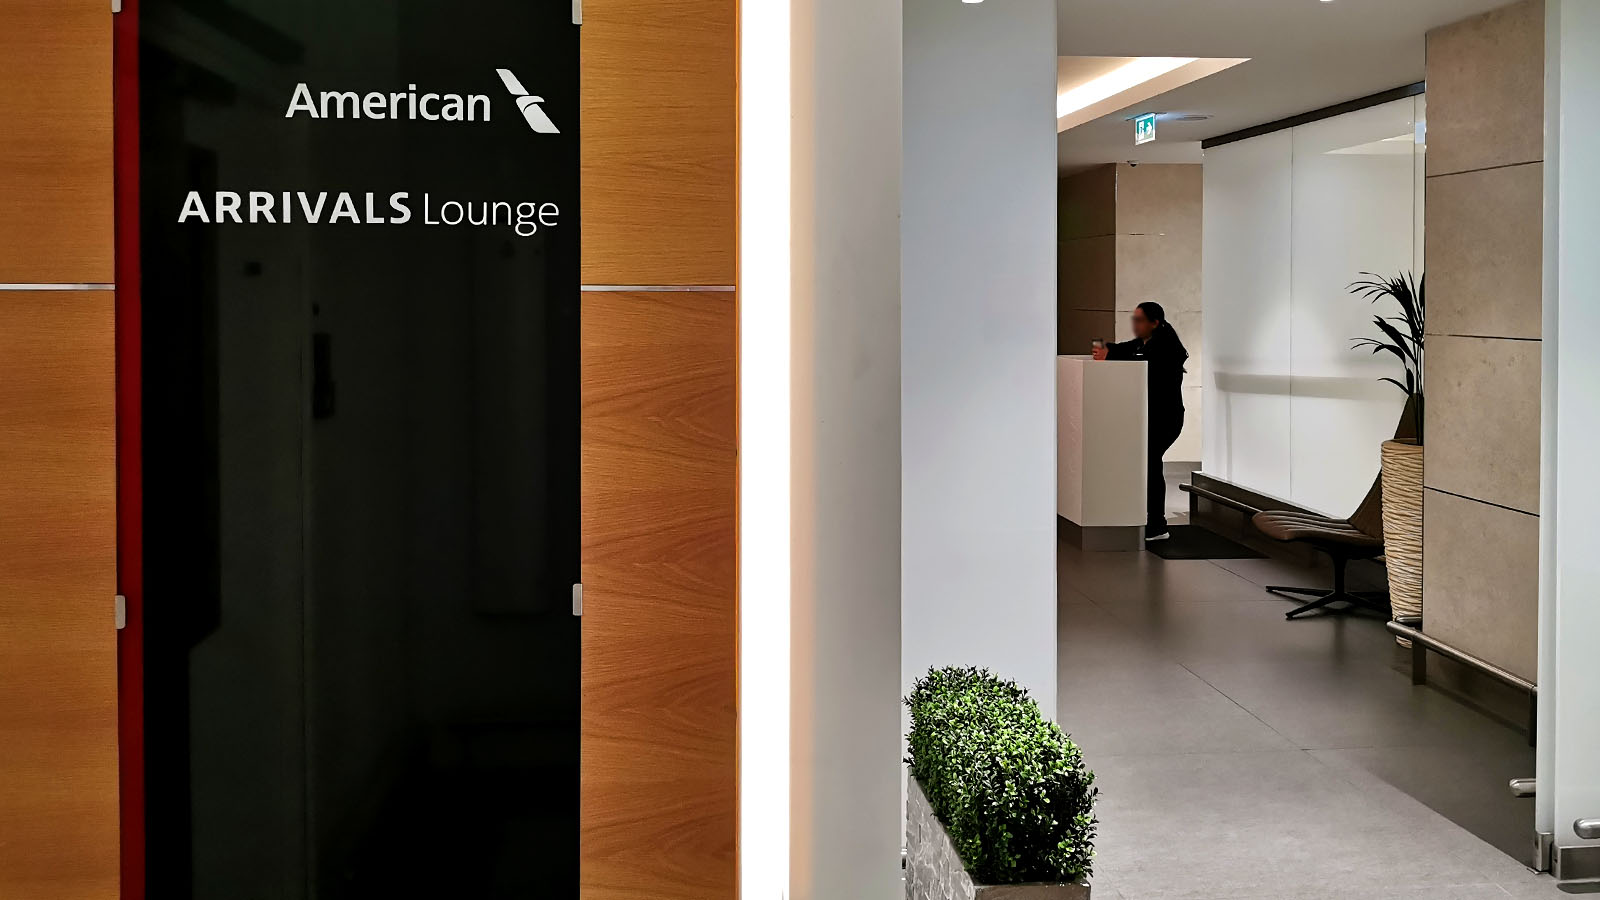 Frequent flyer access to the American Airlines Arrivals Lounge, London